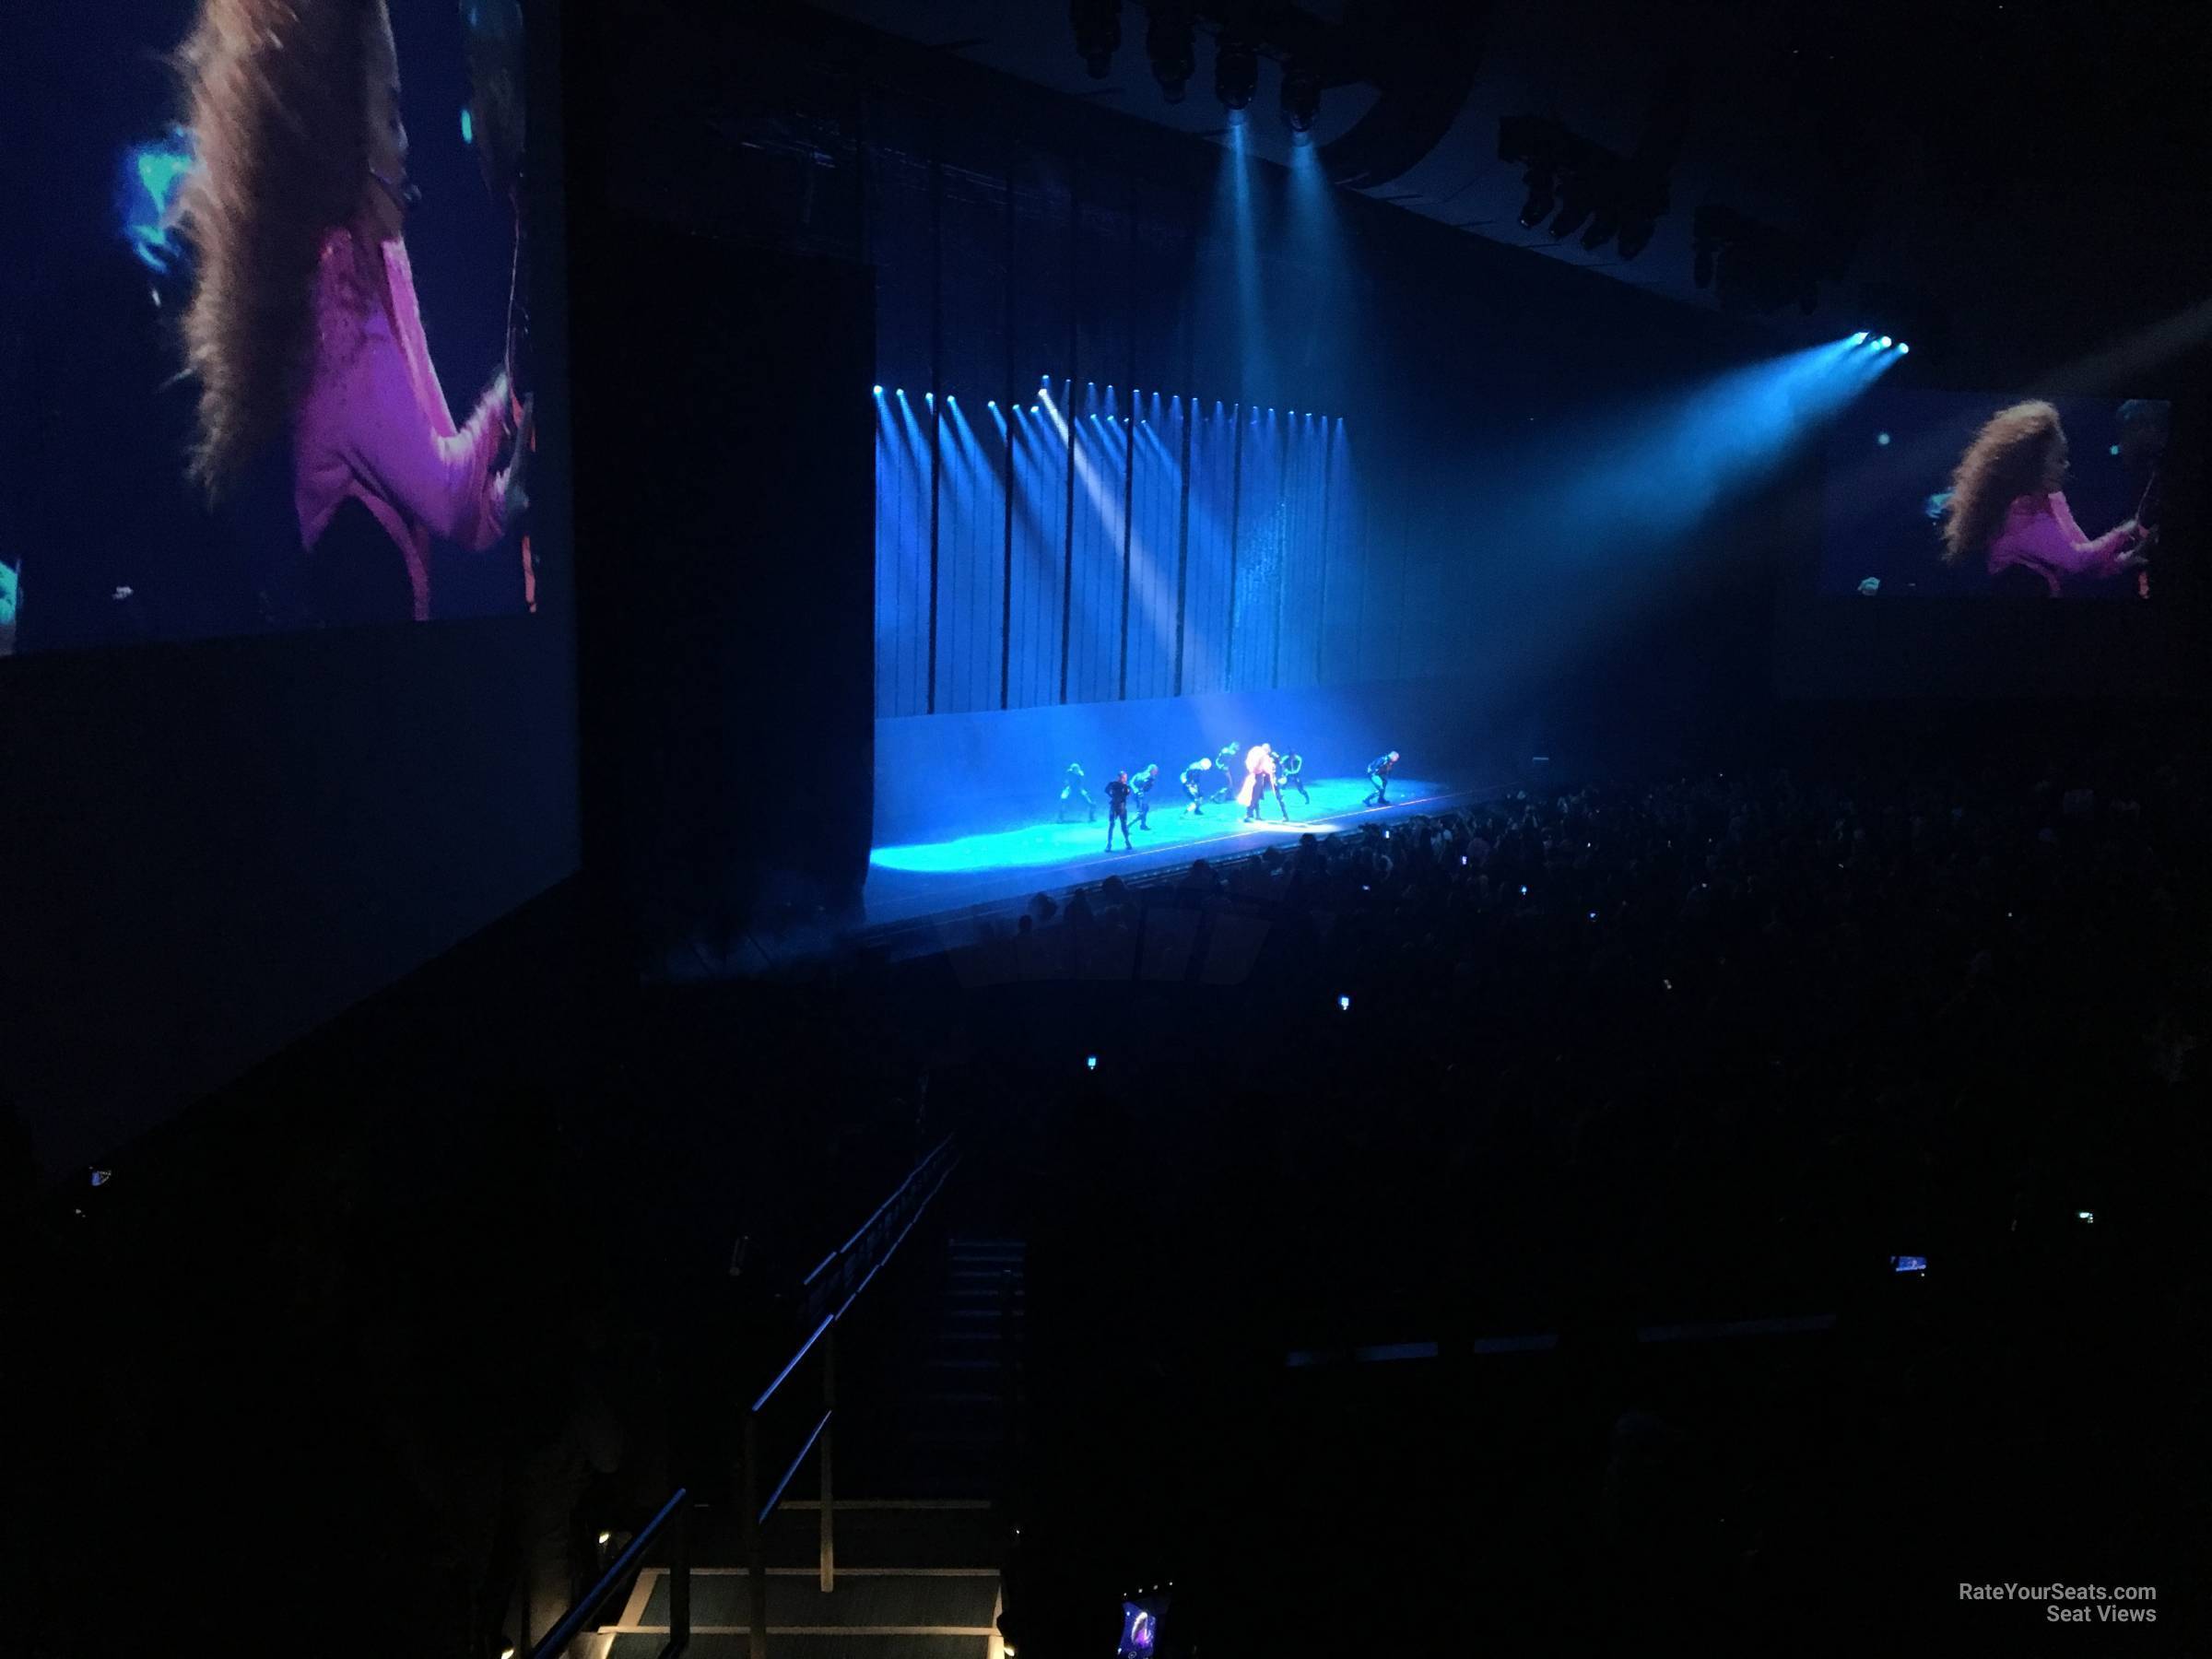 section 307, row f seat view  - dolby live at park mgm